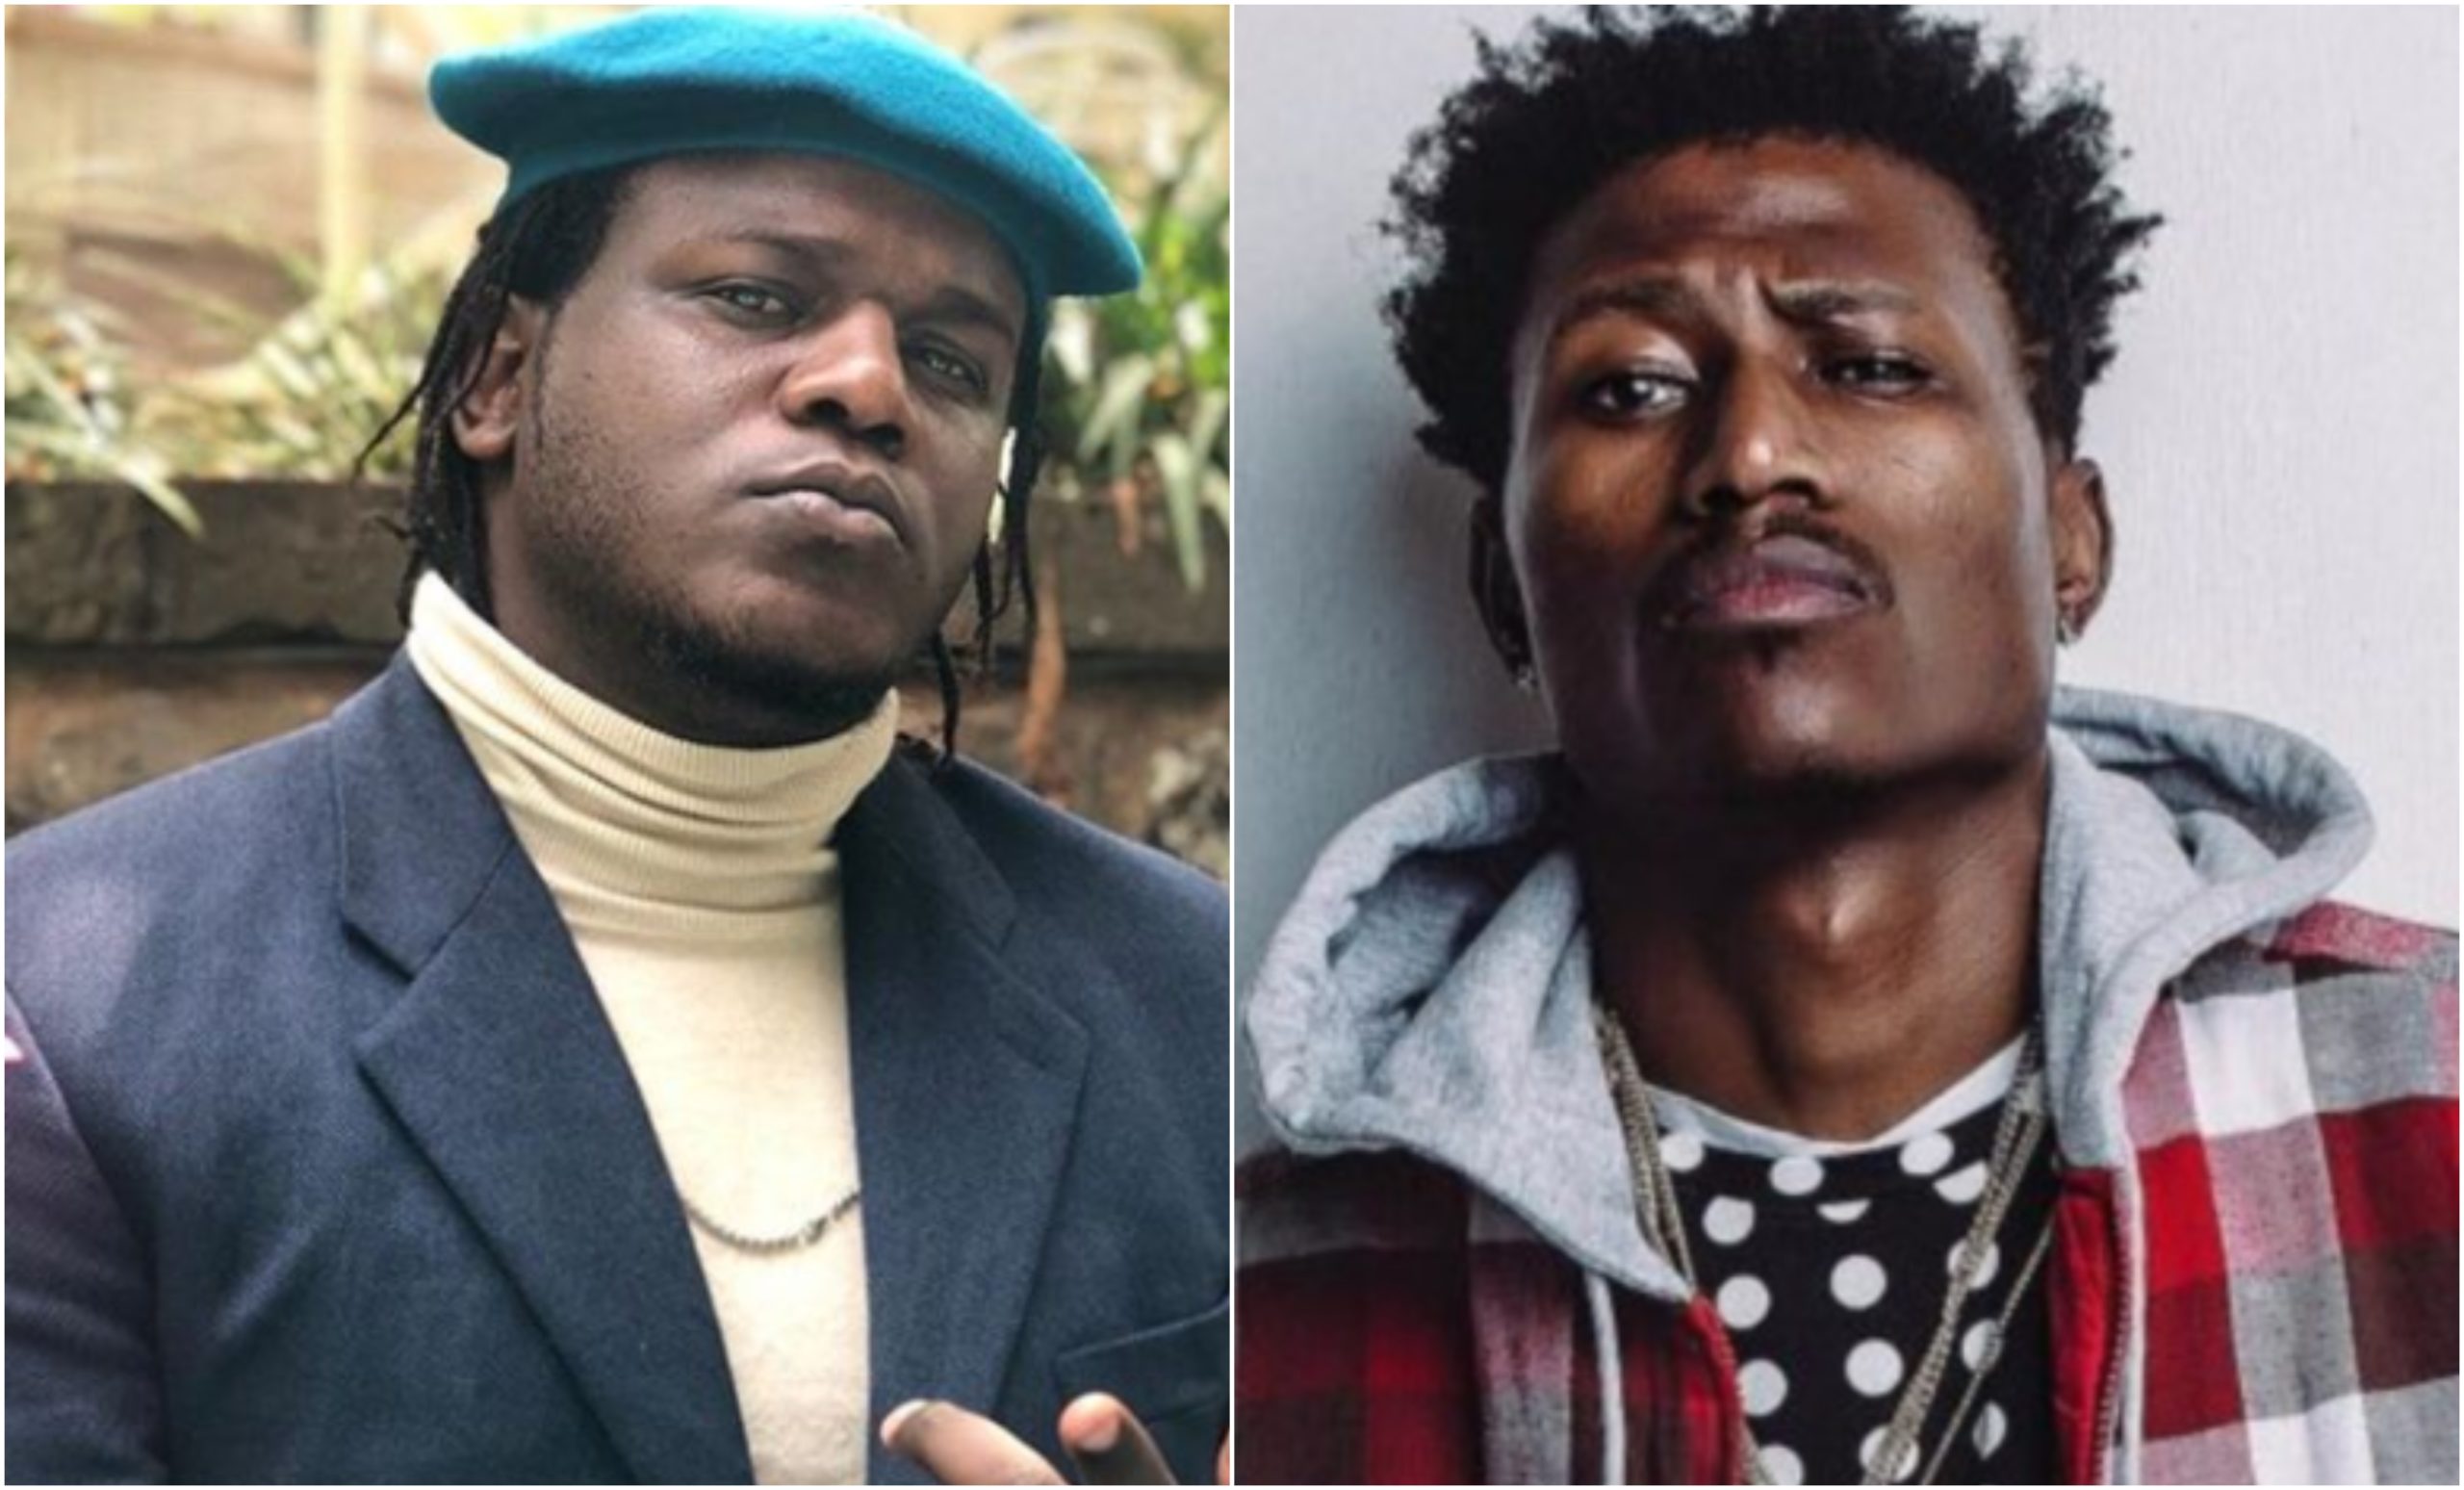 Octopizzo threatens life of popular rapper Breeder LW day after mocking him online (Video)